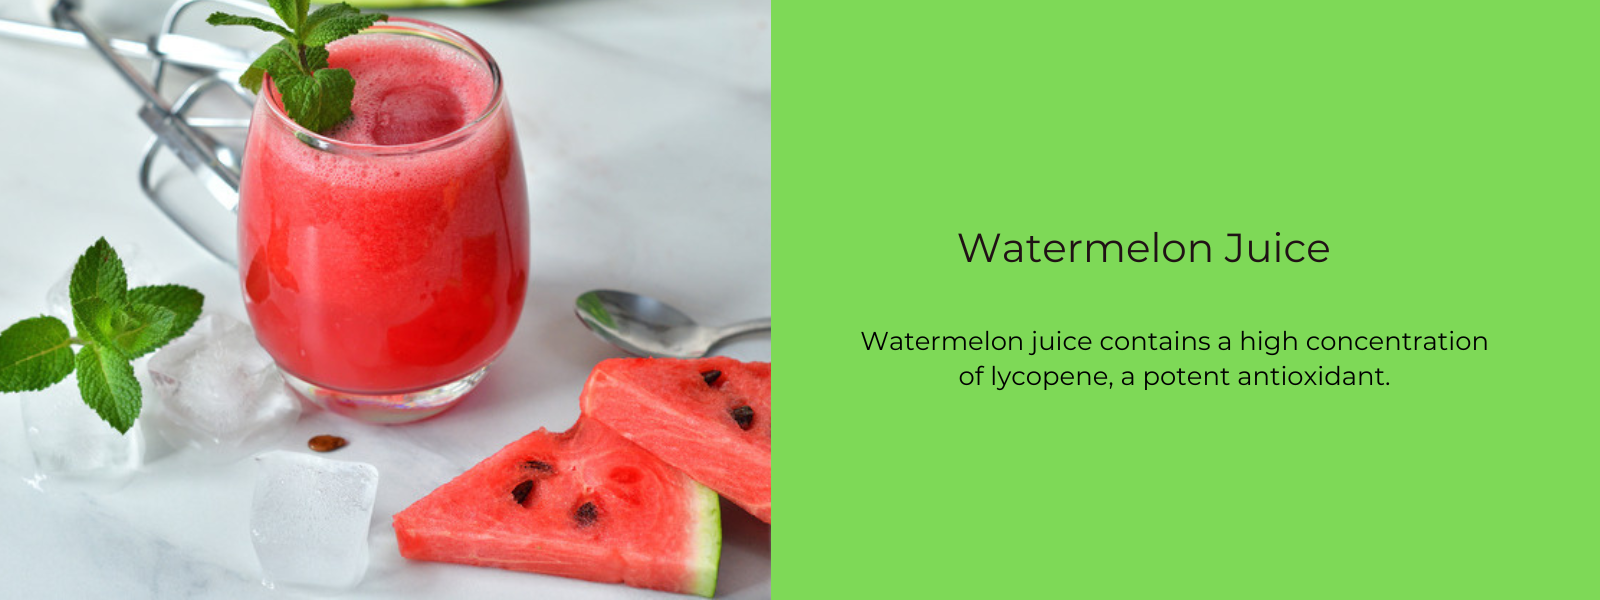 Watermelon Juice – Health Benefits, Uses and Important Facts